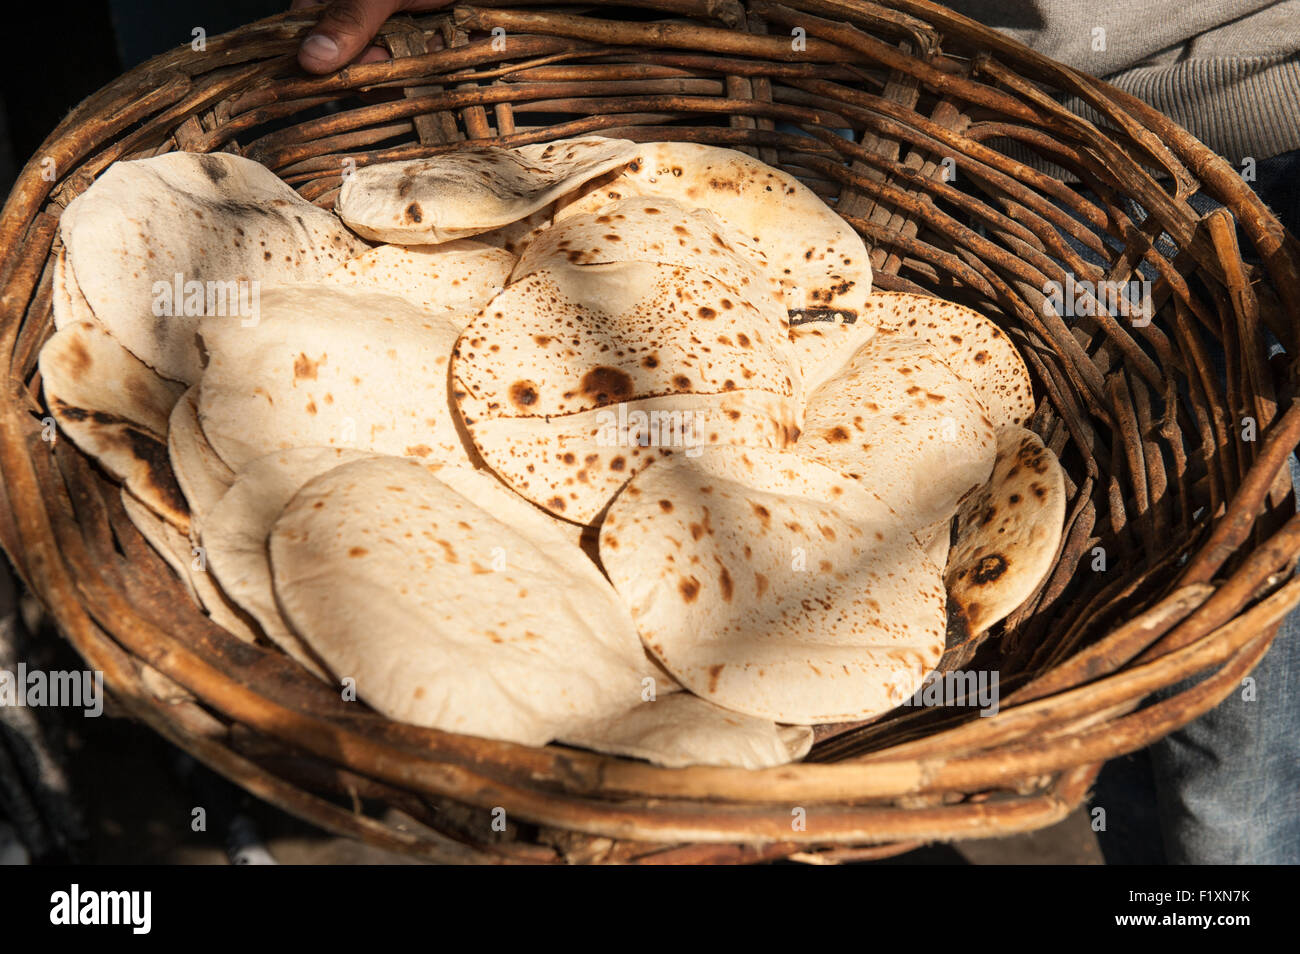 Amritsar, Punjab, India.  The Golden Temple - Harmandir Sahib; a basket full of chapati flatbreads in the Langar kitchen, part of the meal which is offered free to anyone who visits the gurdwara temple. Stock Photo